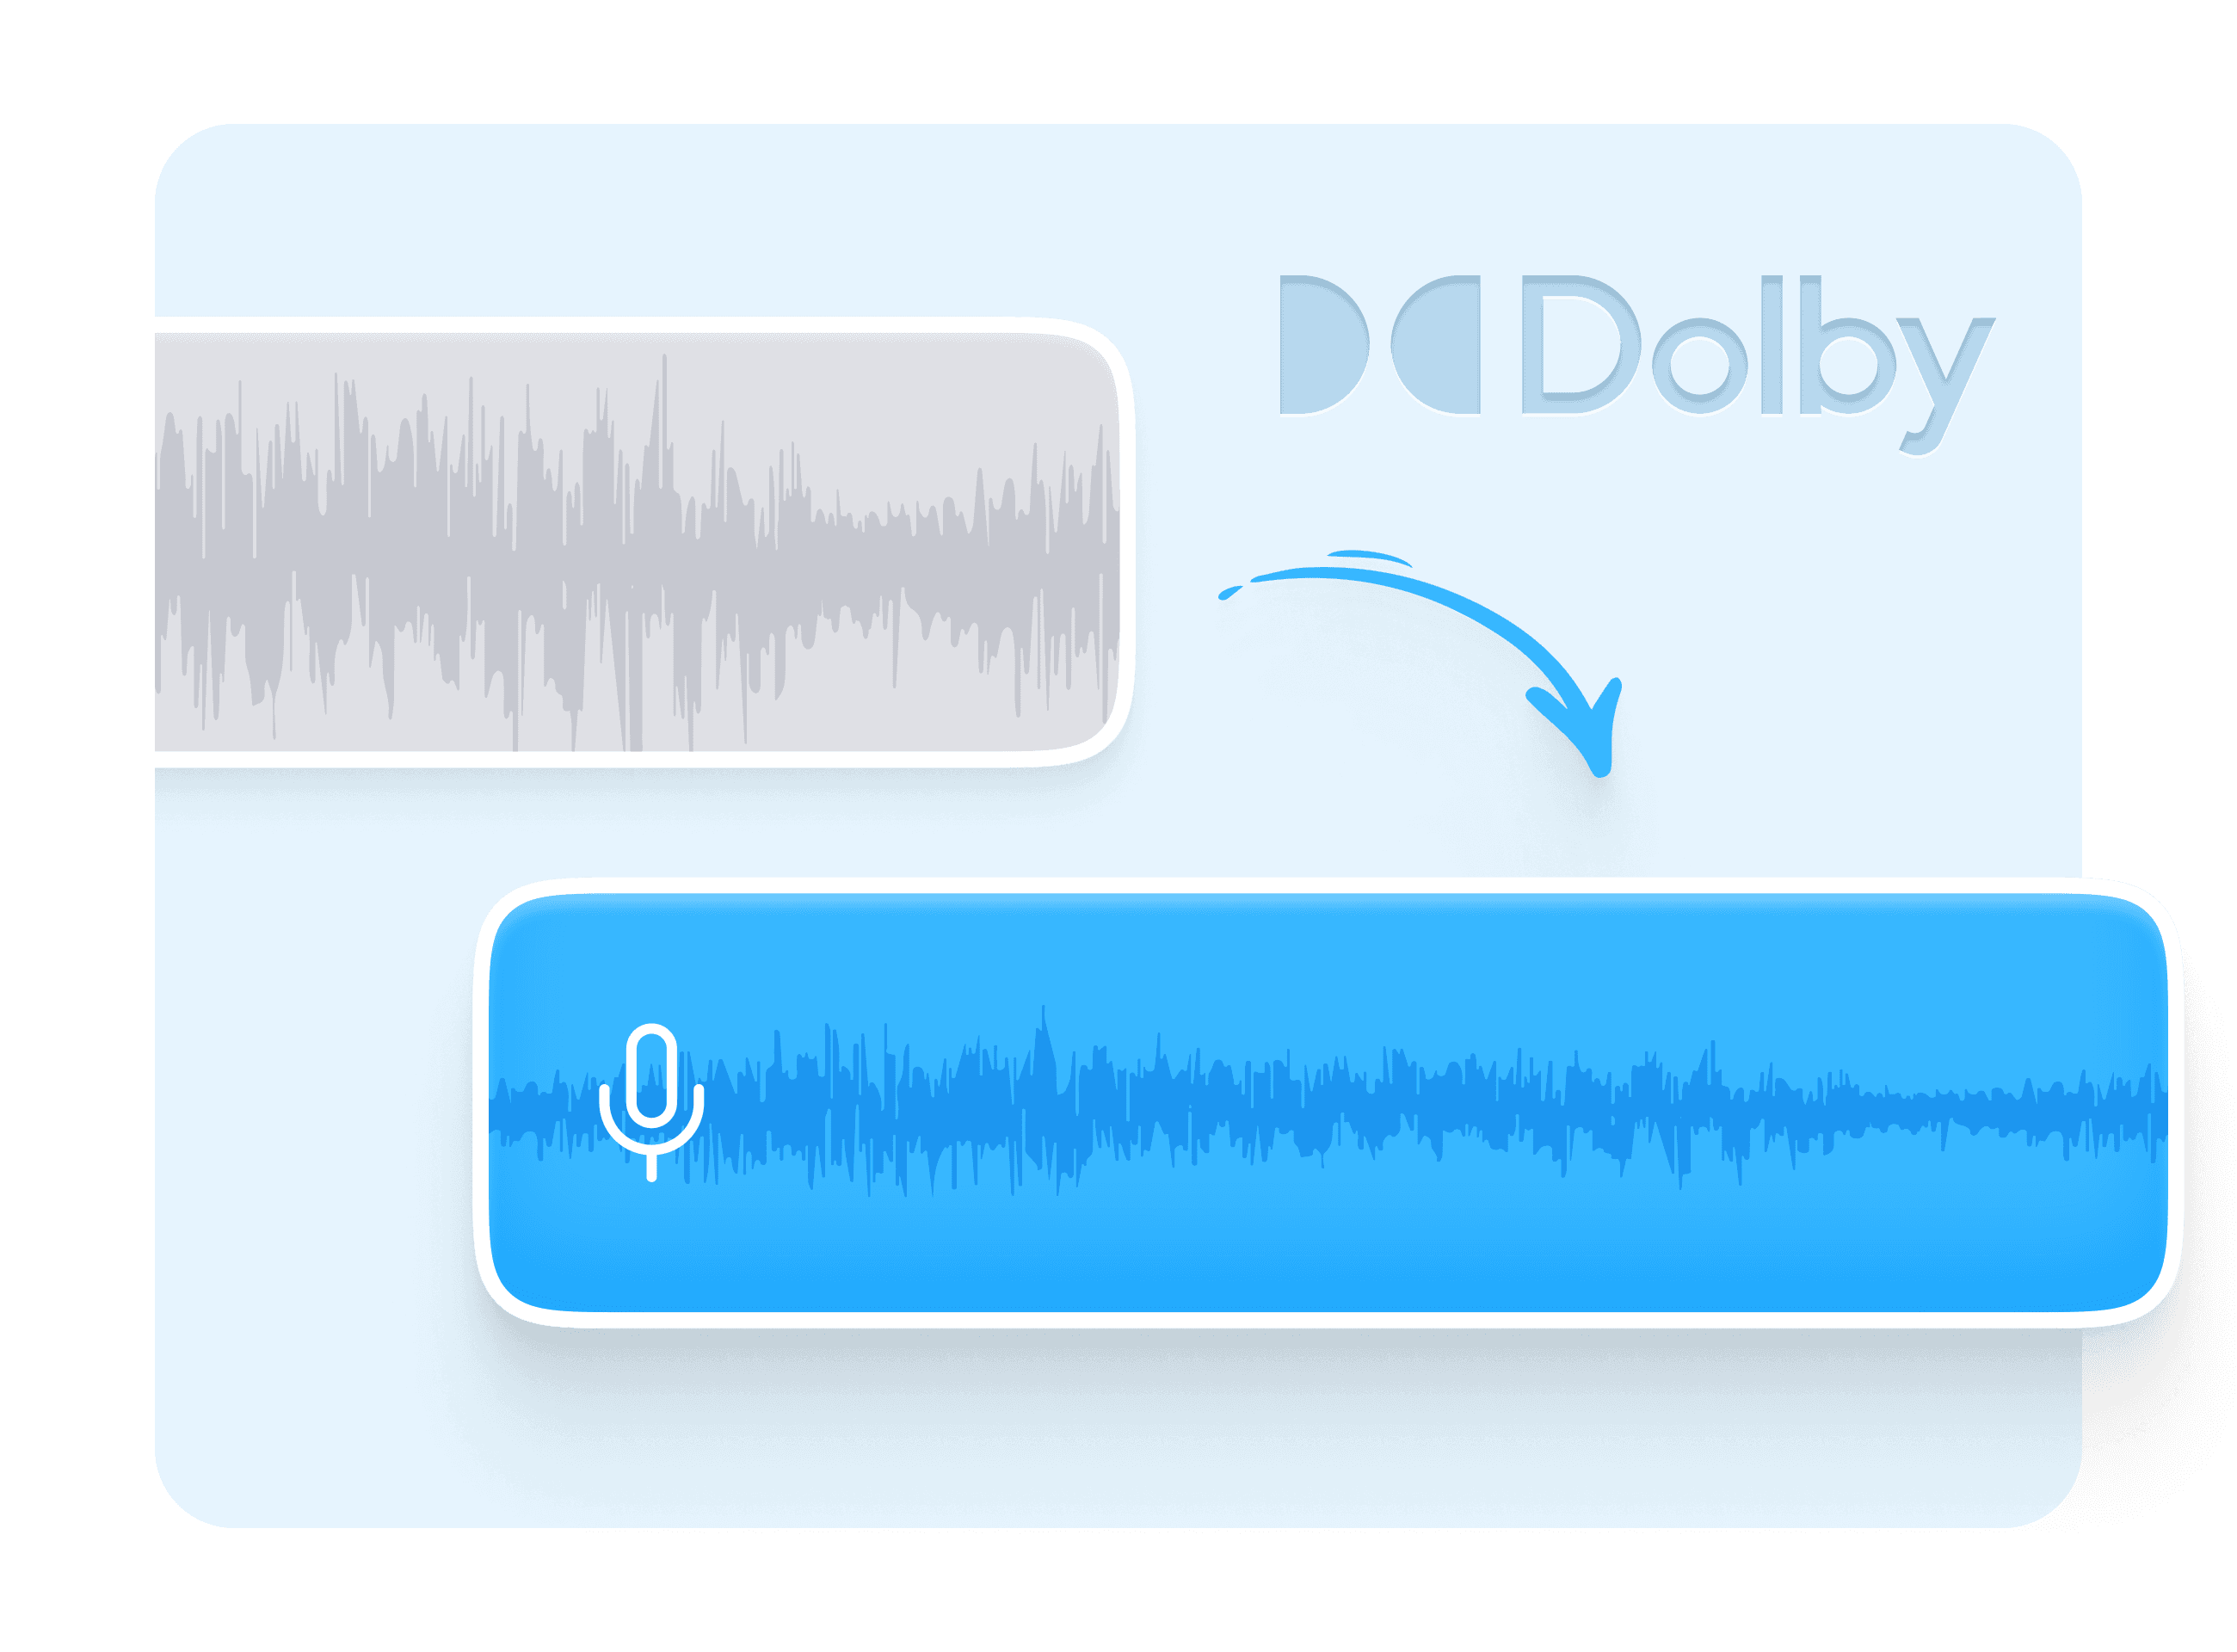 Powered by Dolby Technology